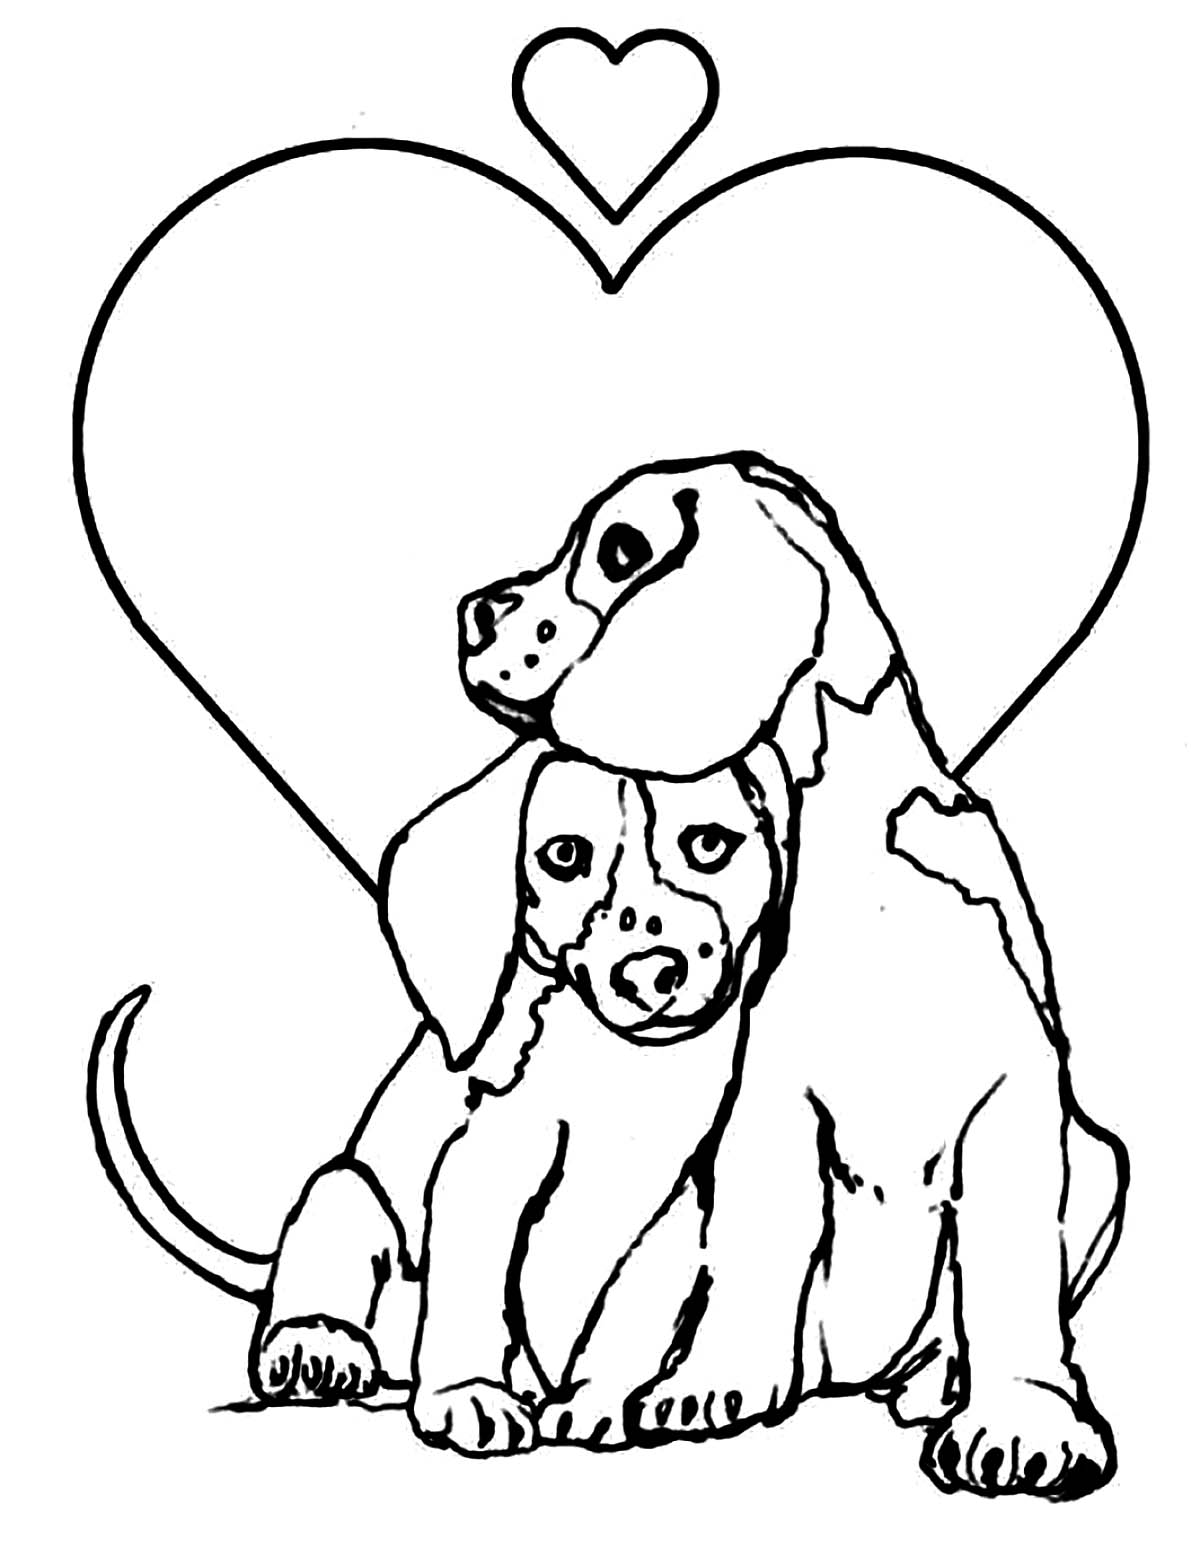 Dog for children : loving dogs - Dogs Kids Coloring Pages